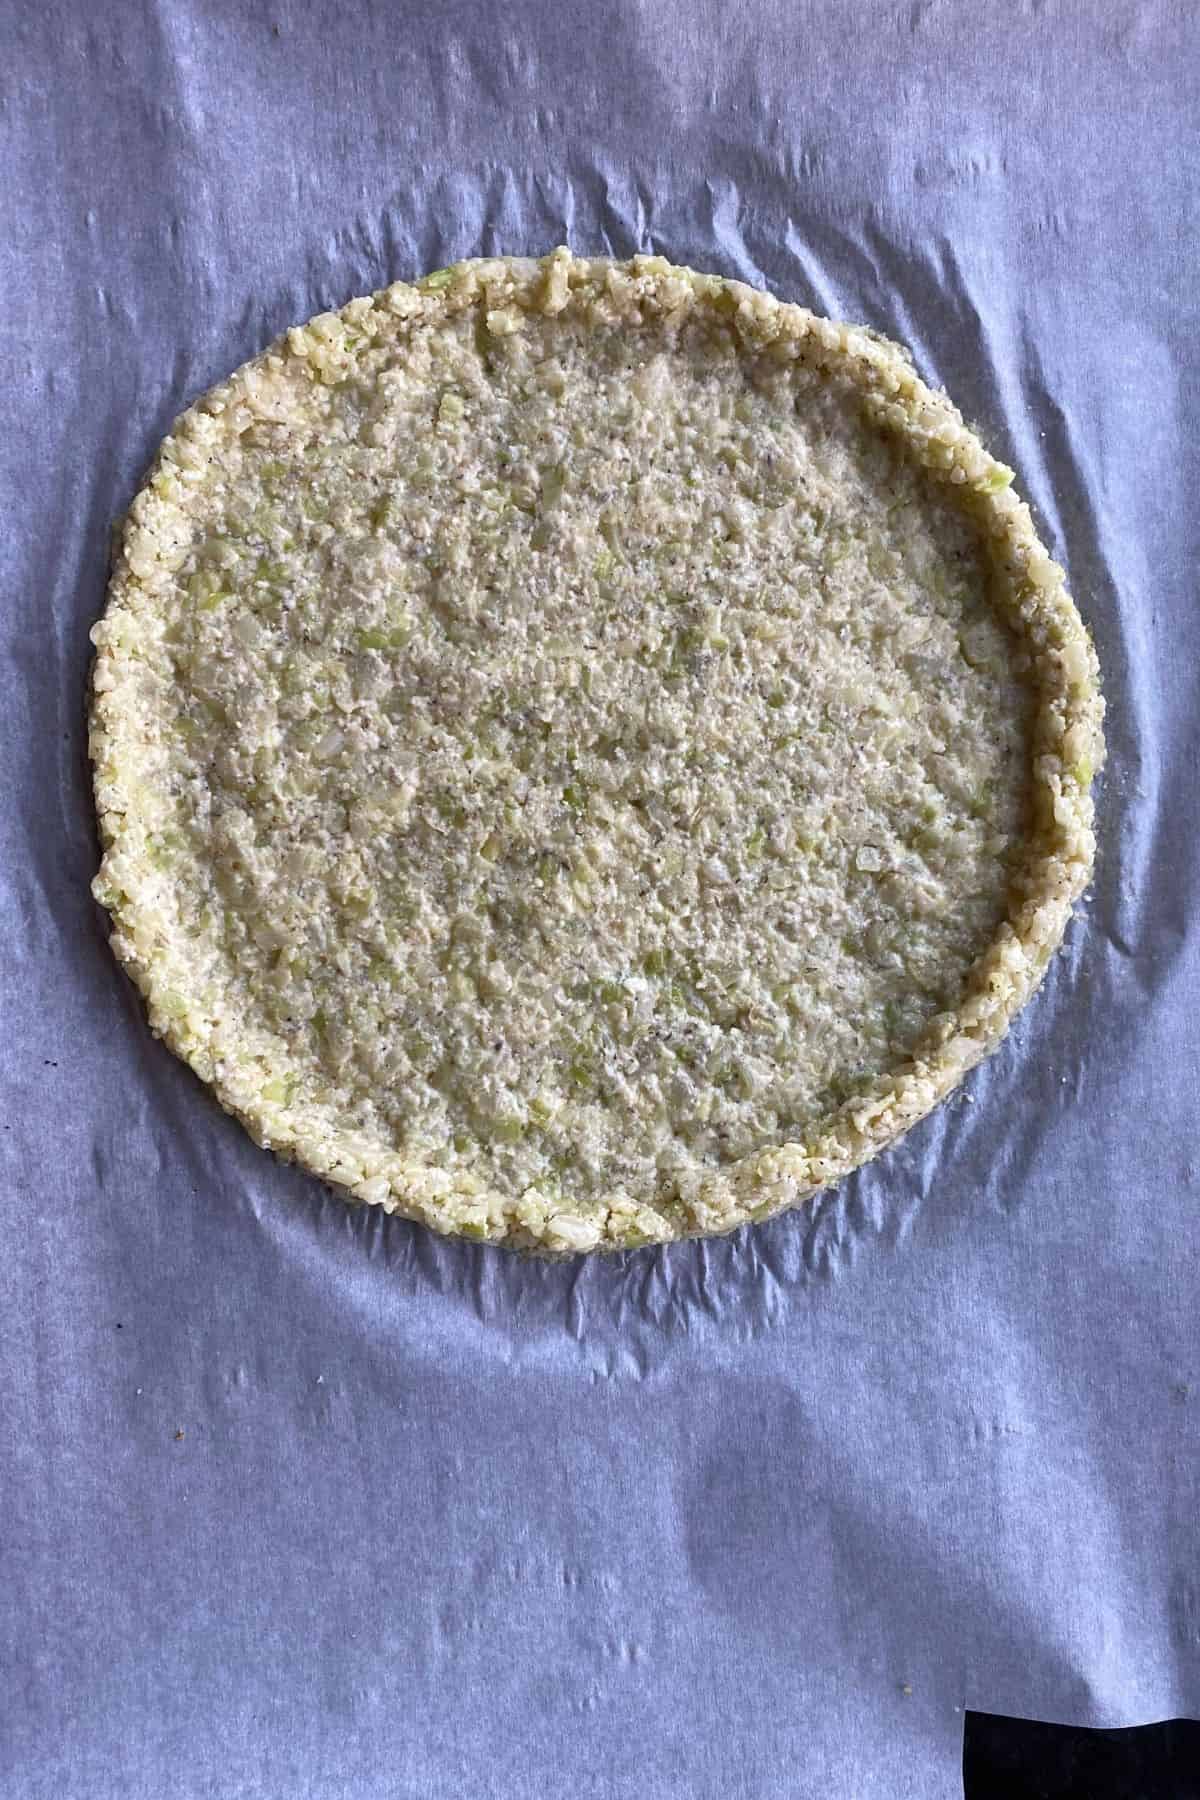 Cauliflower crust before baked pressed into a circle on parchment paper